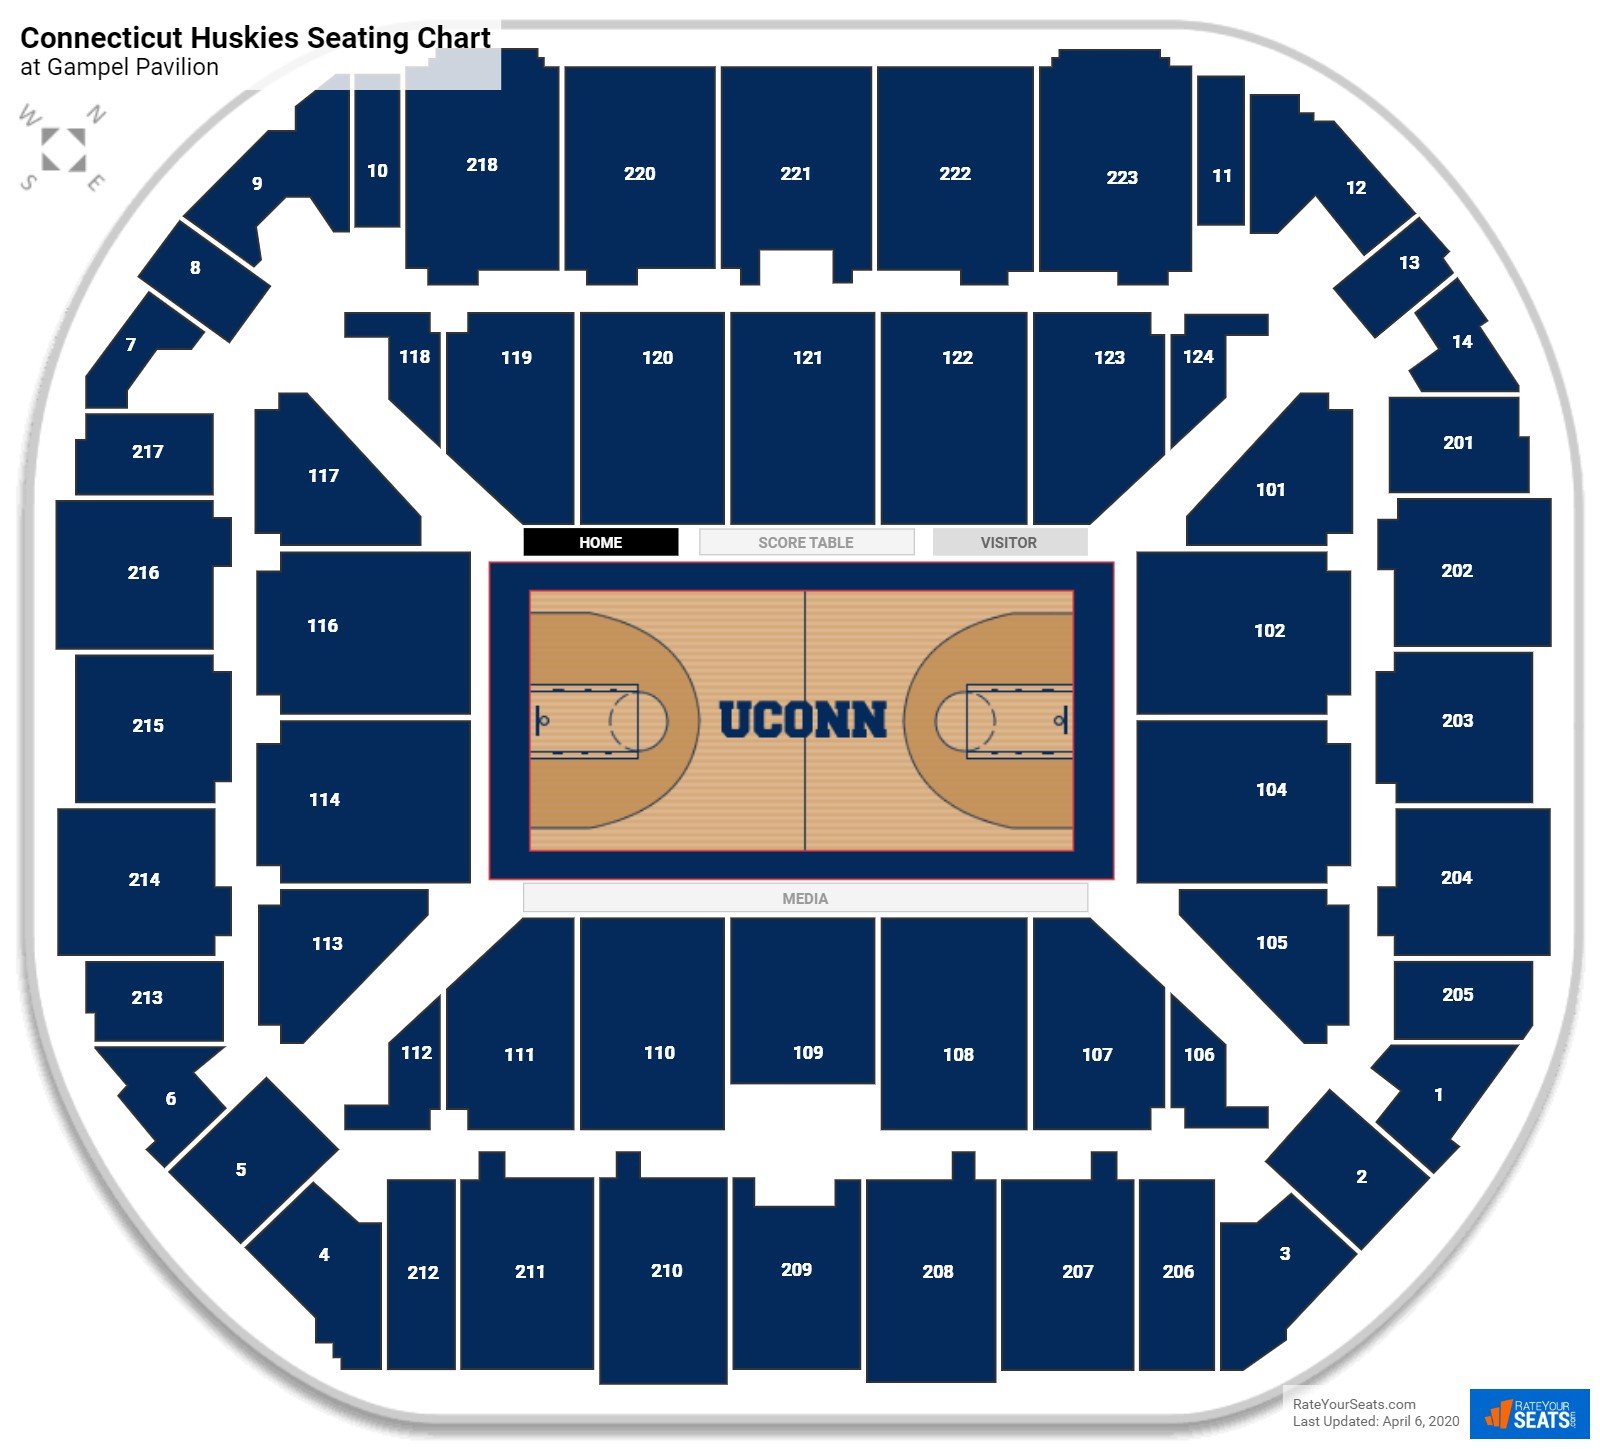 Gampel Pavilion Seating Charts - RateYourSeats.com